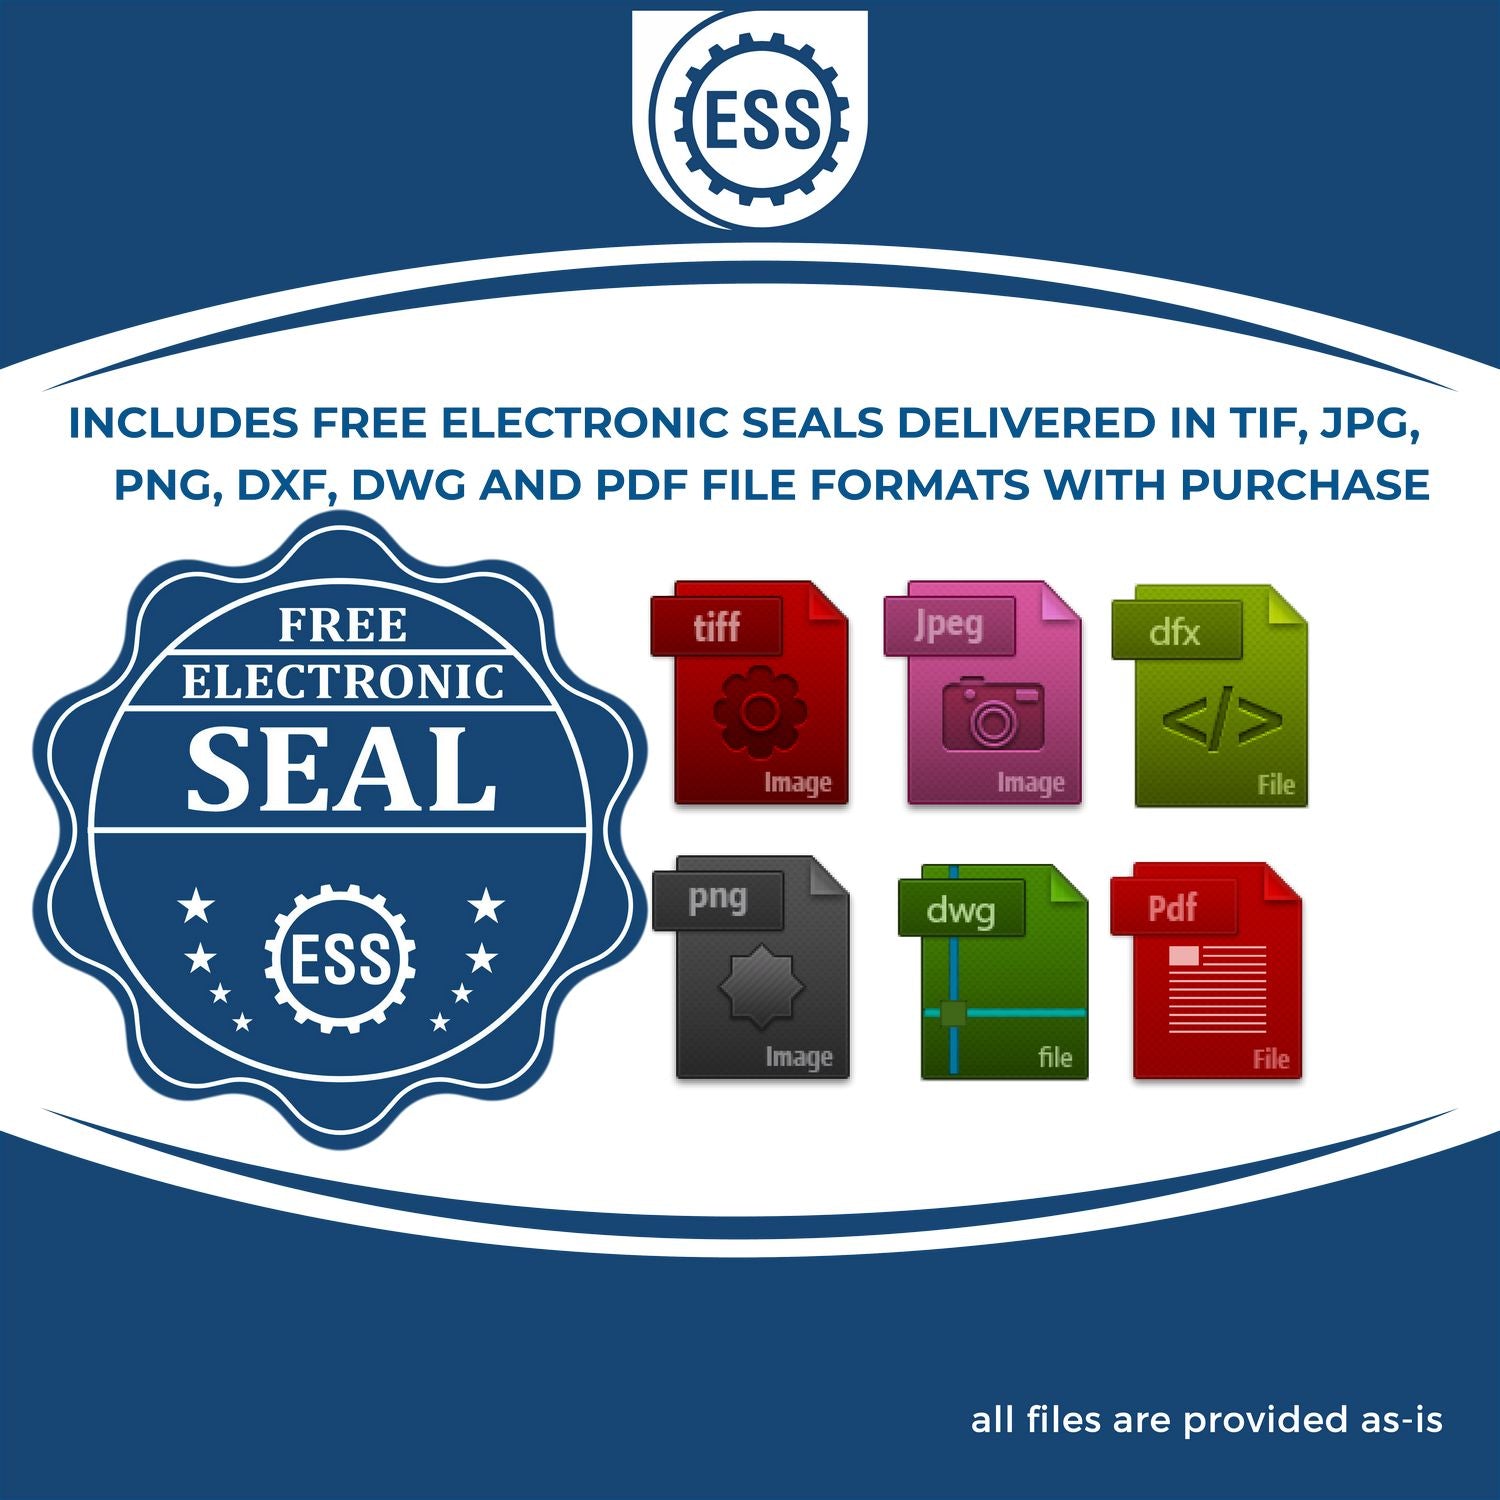 An infographic for the free electronic seal for the Gift South Dakota Landscape Architect Seal illustrating the different file type icons such as DXF, DWG, TIF, JPG and PNG.